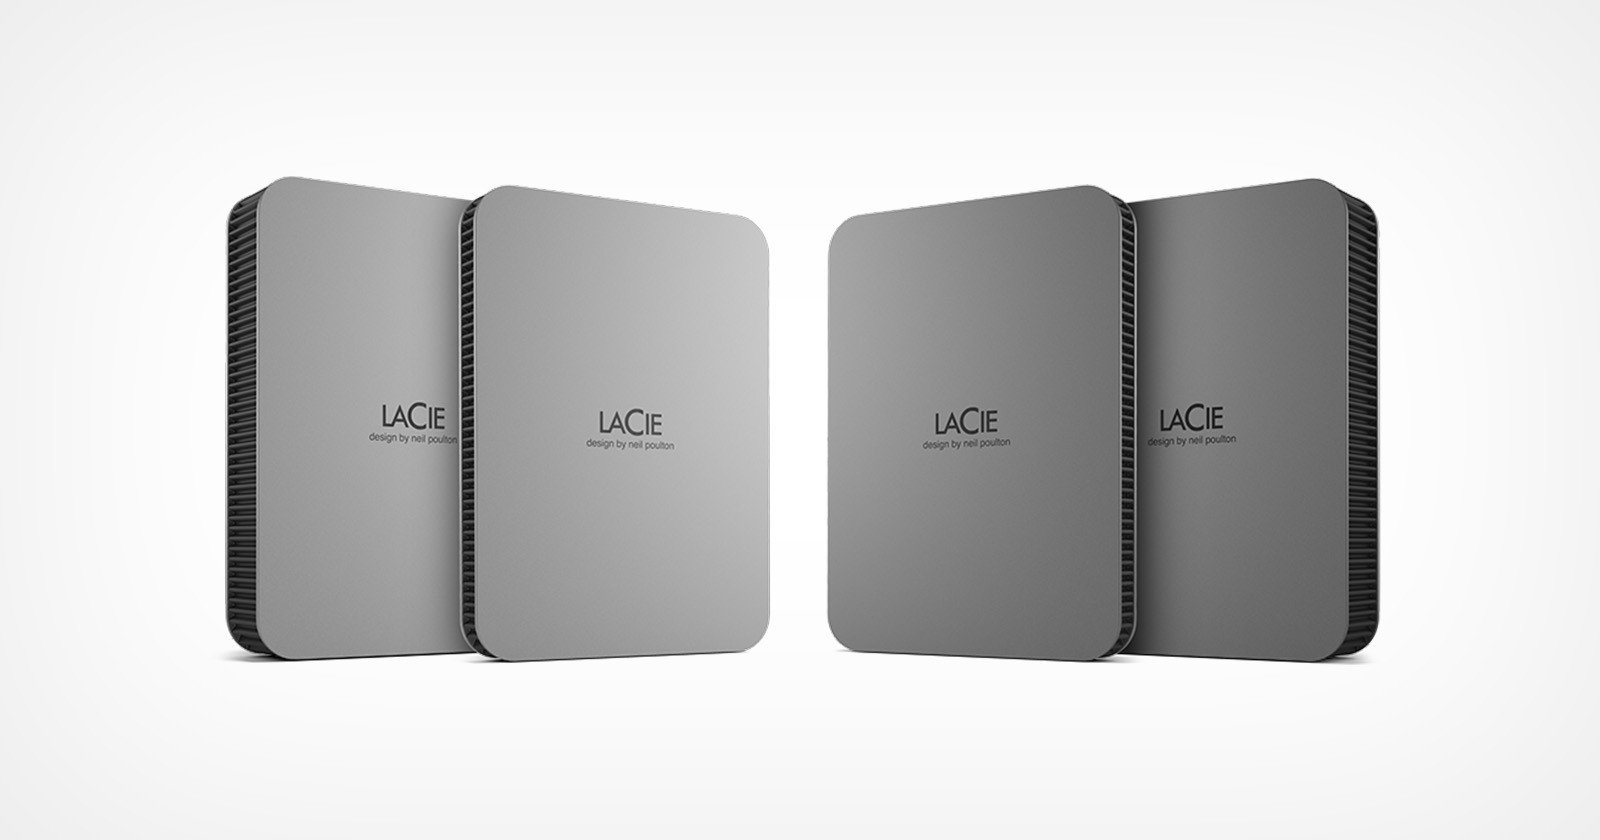 LaCies New Compact Mobile Hard Drives Have up to 5TB of Capacity